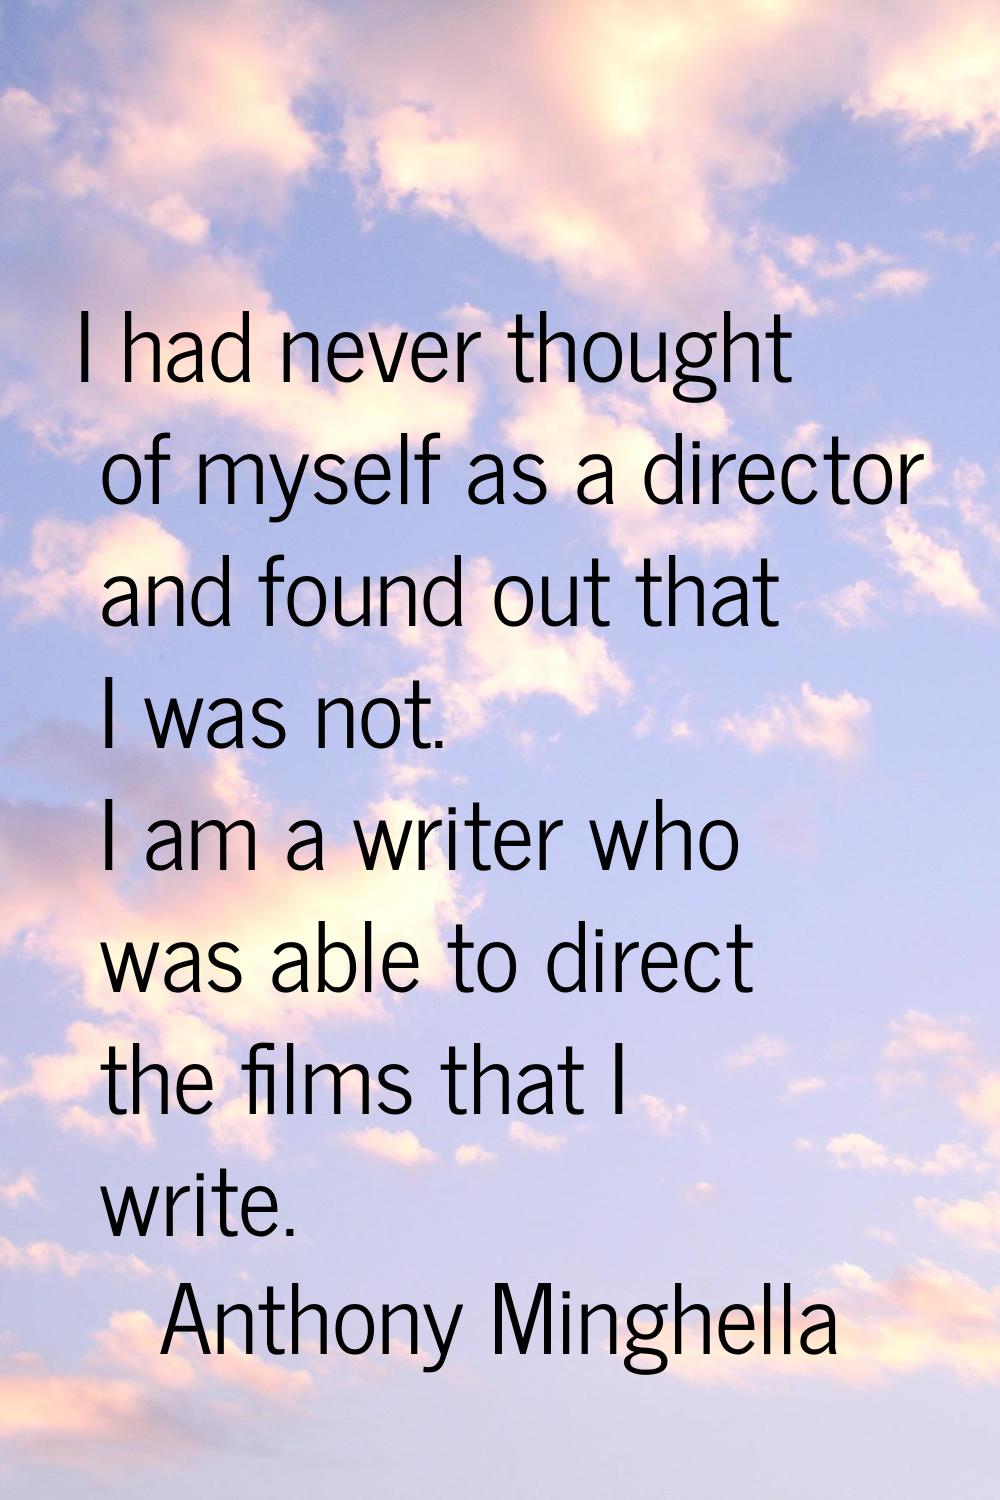 I had never thought of myself as a director and found out that I was not. I am a writer who was abl